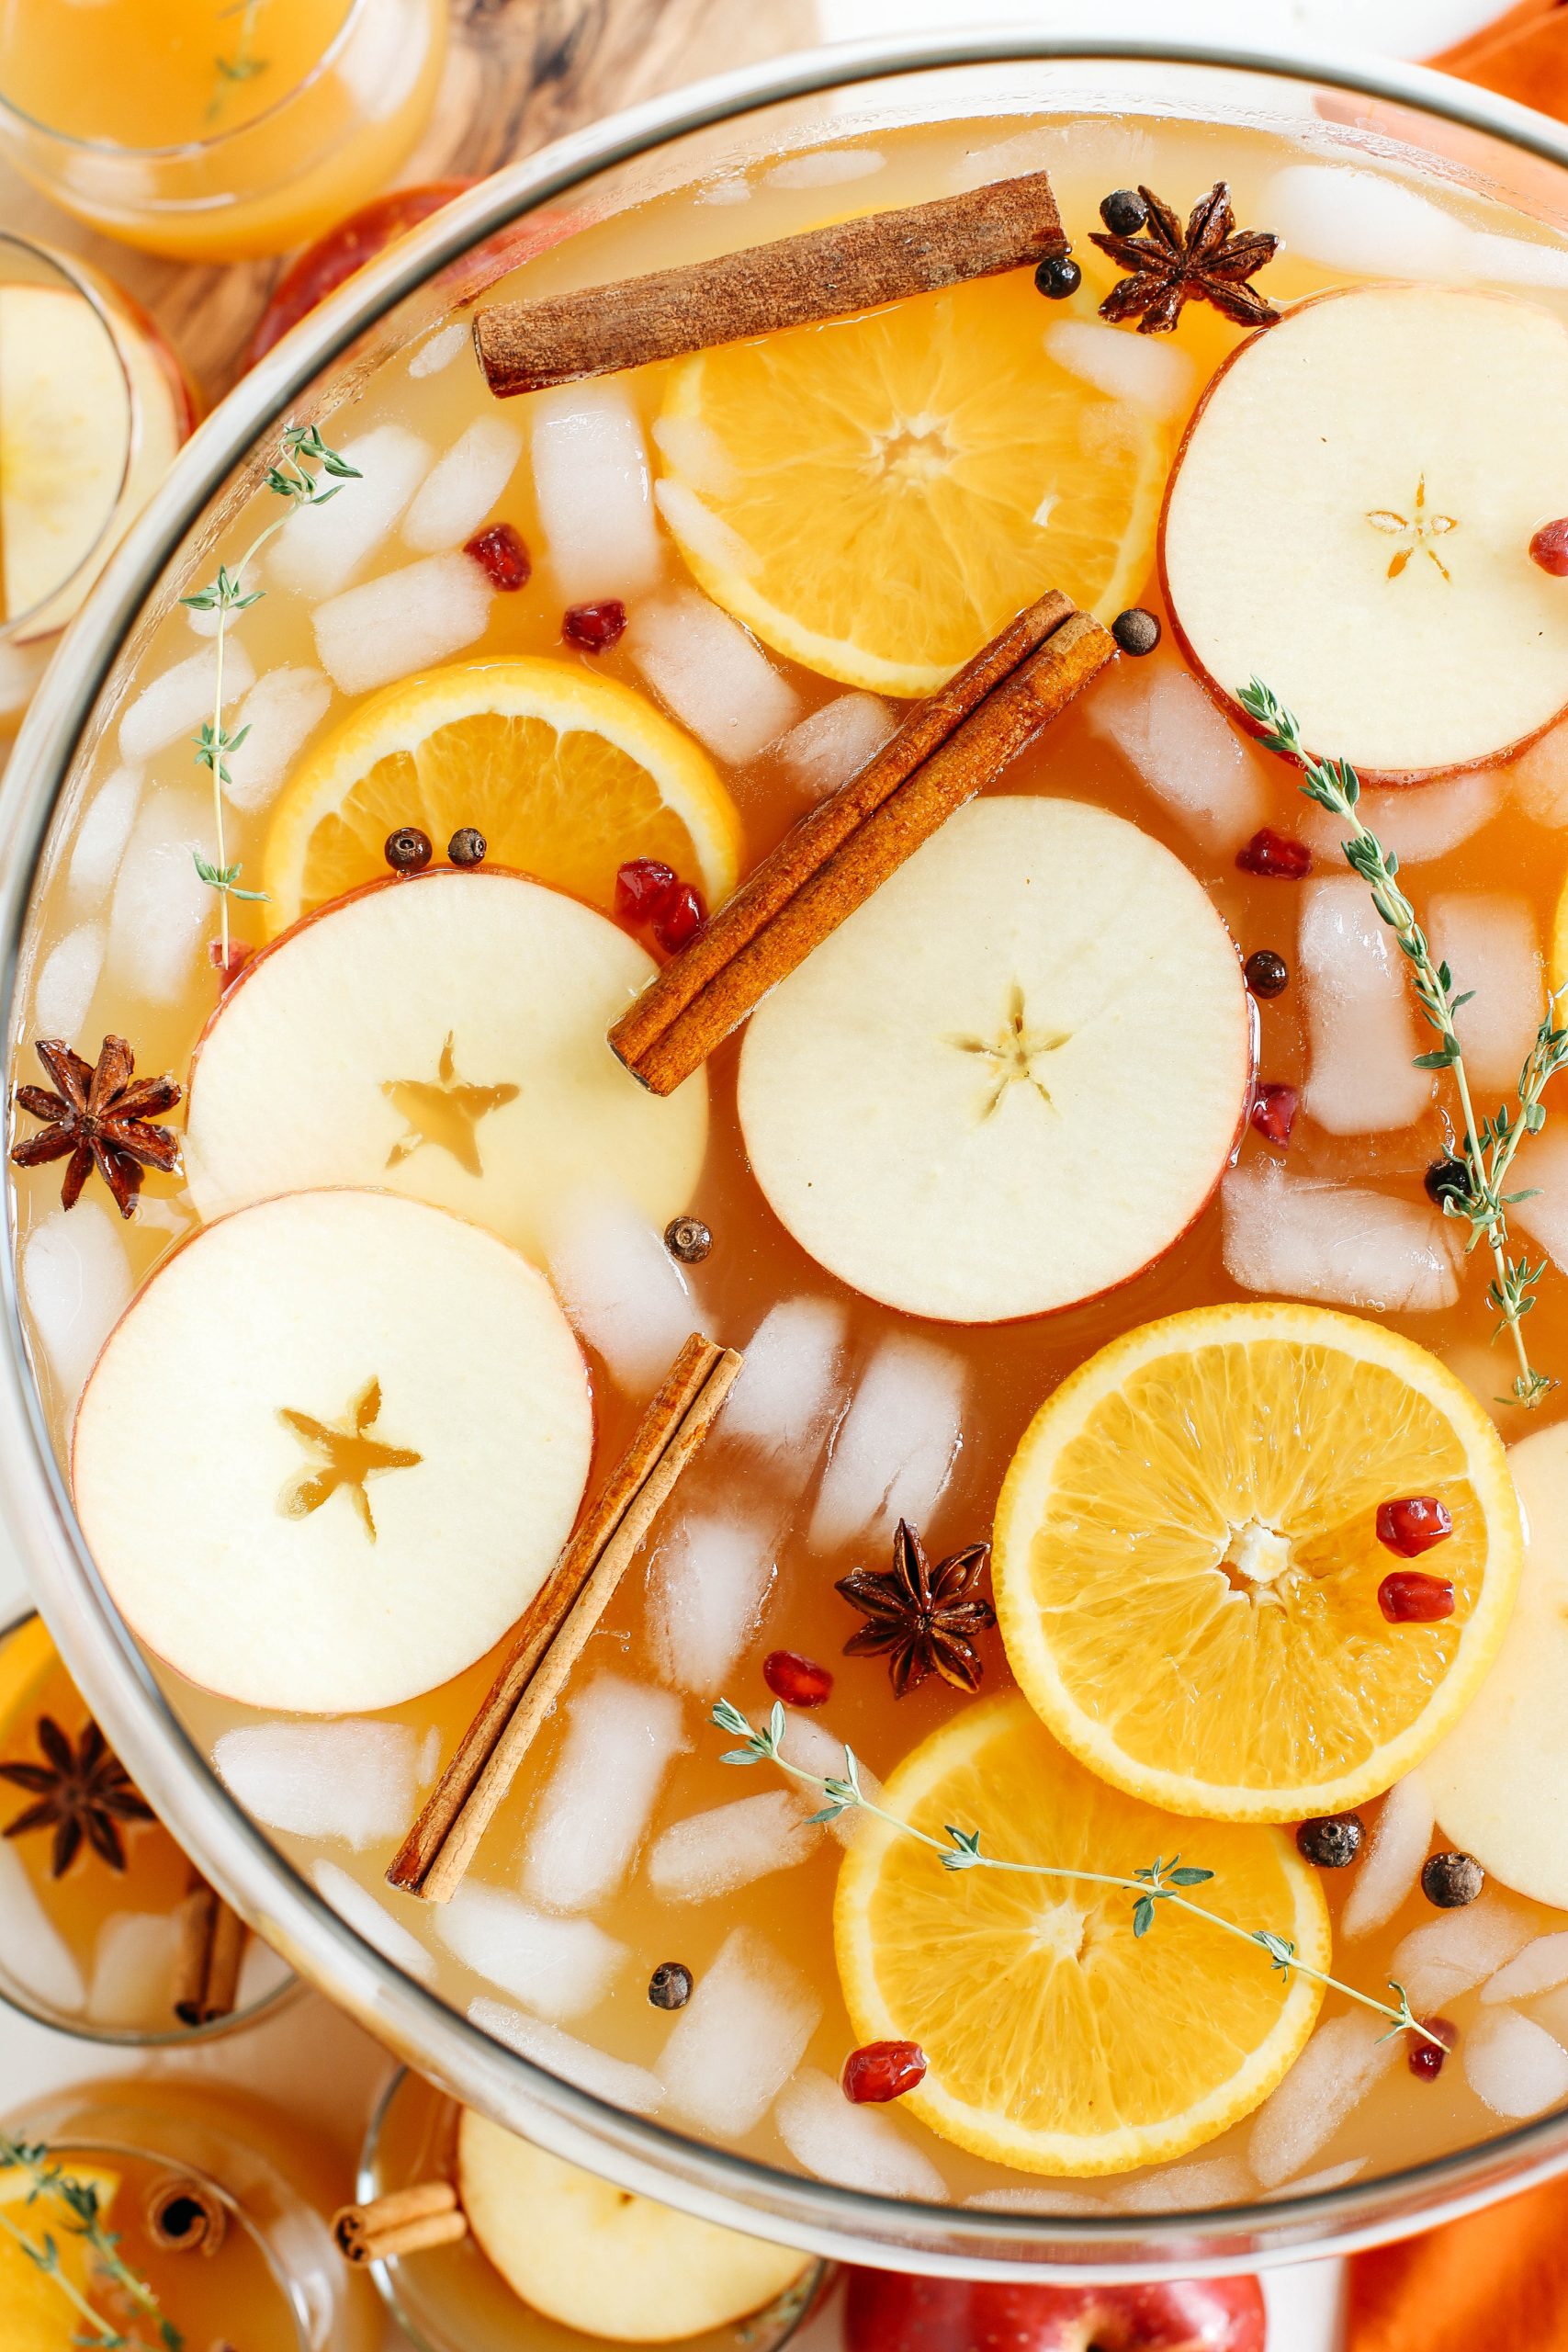 This Harvest Apple Cider Punch makes the perfect addition to any holiday party or gathering with a delicious combination of your favorite fall flavors all marinated together in one festive cocktail!